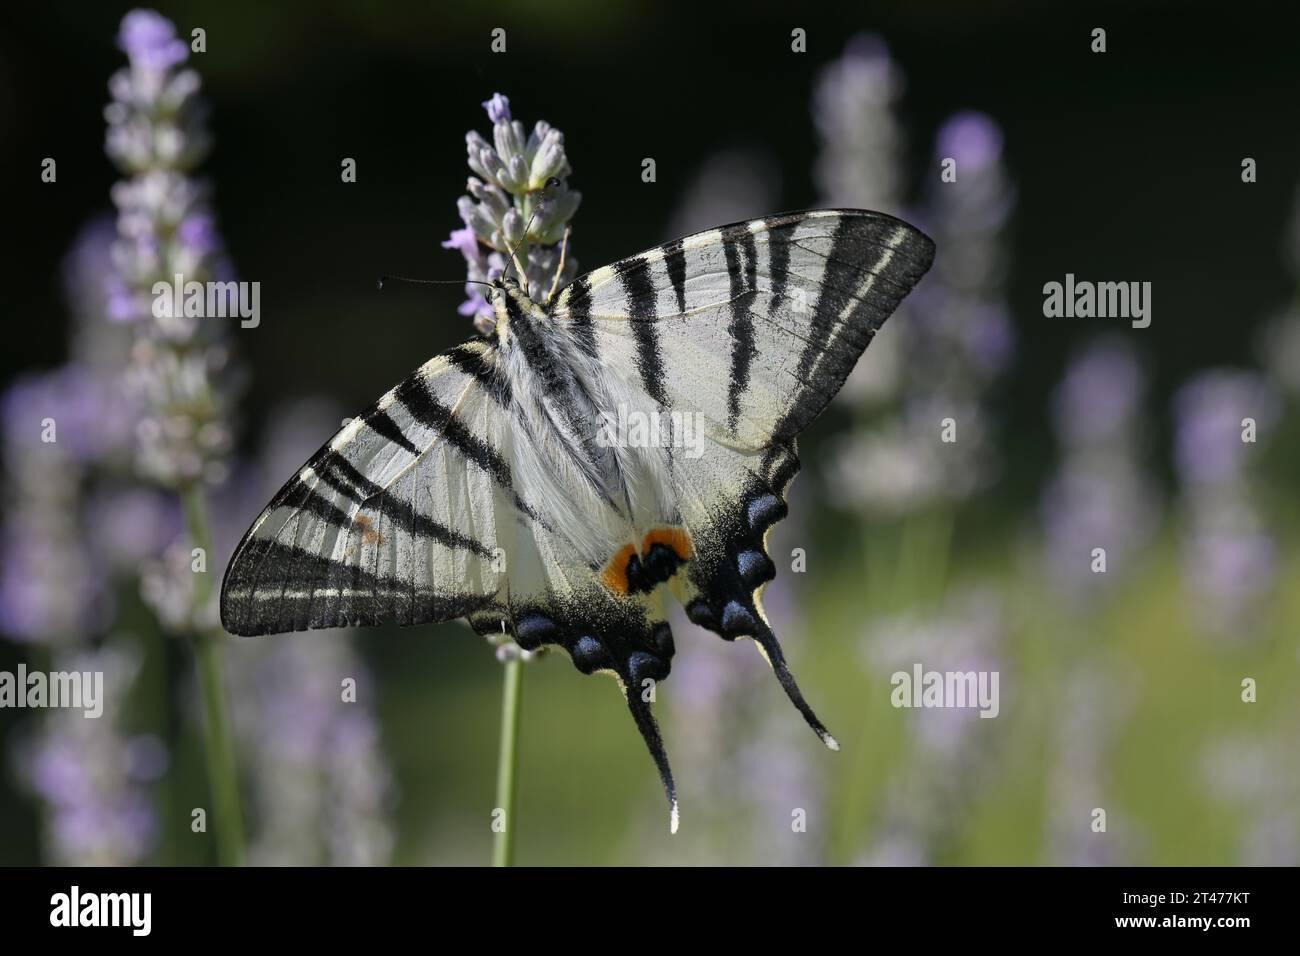 Scarce swallowtail (Iphiclides podalirius) feeding on flowers in a garden. Photographed in Tuscany, Italy. Stock Photo